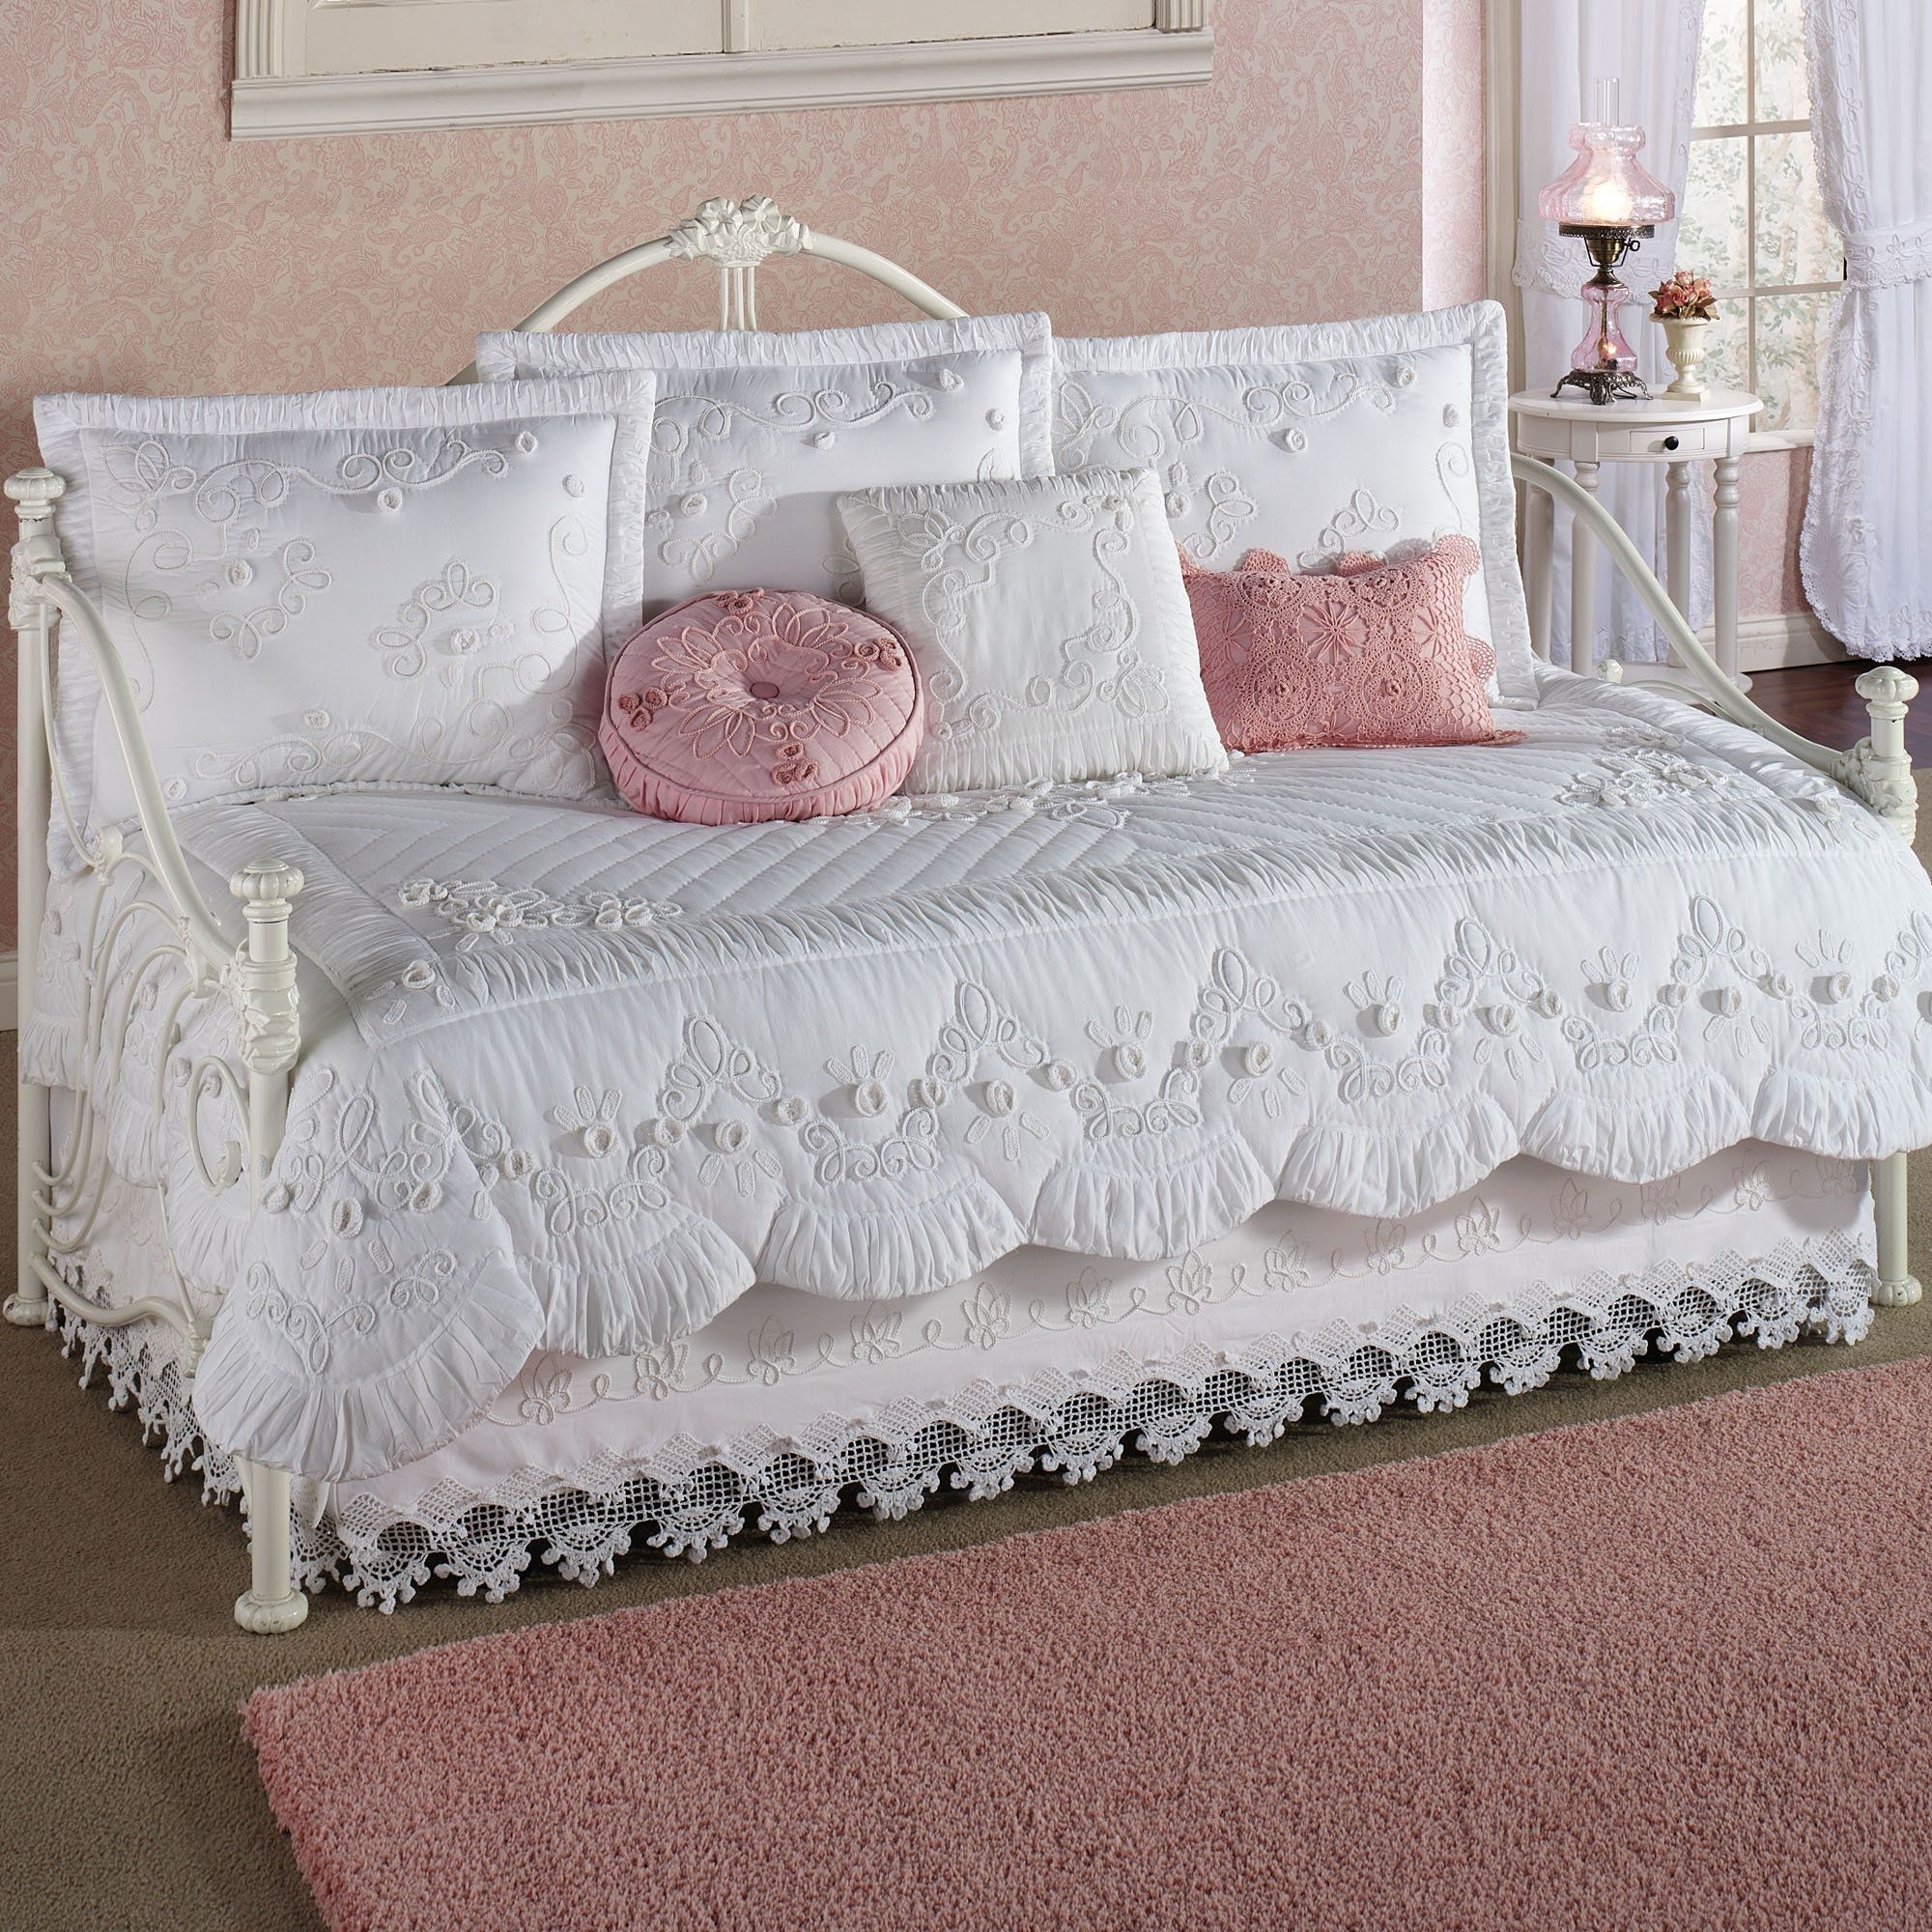 Girl daybed bedding